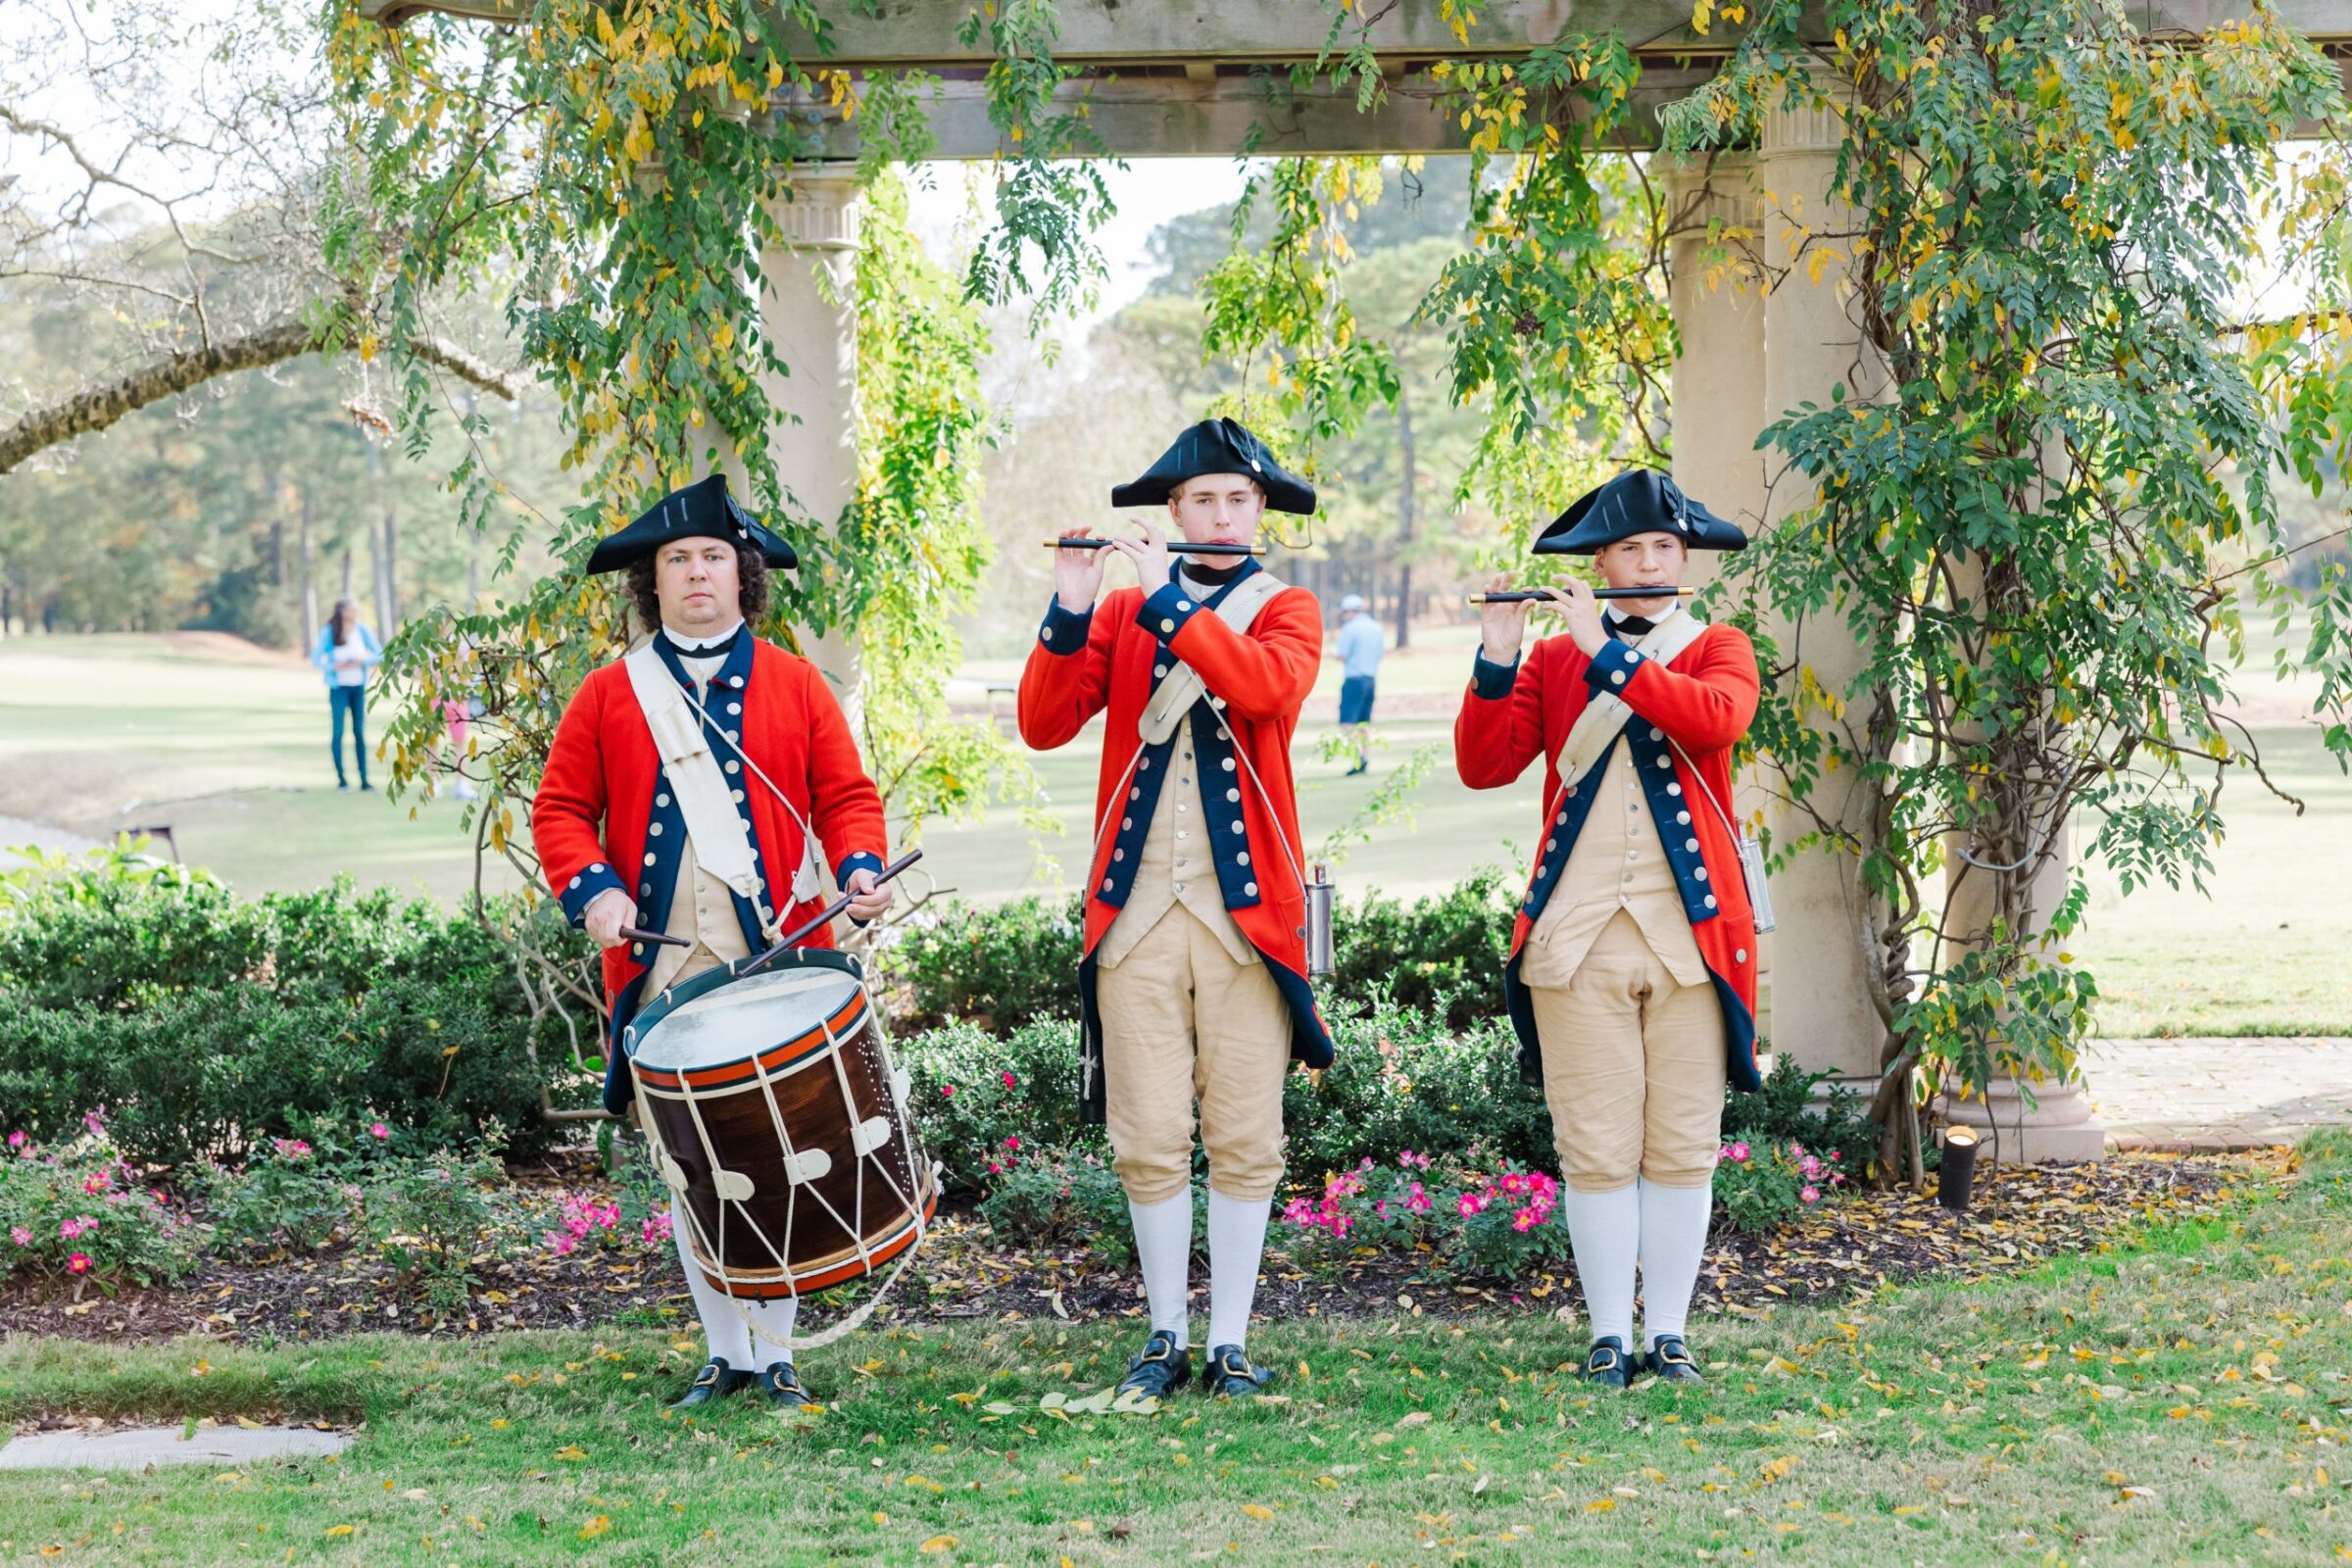 Fifes and Drum playing at a Colonial Williamsburg Wedding with Colonial Williamsburg Resorts